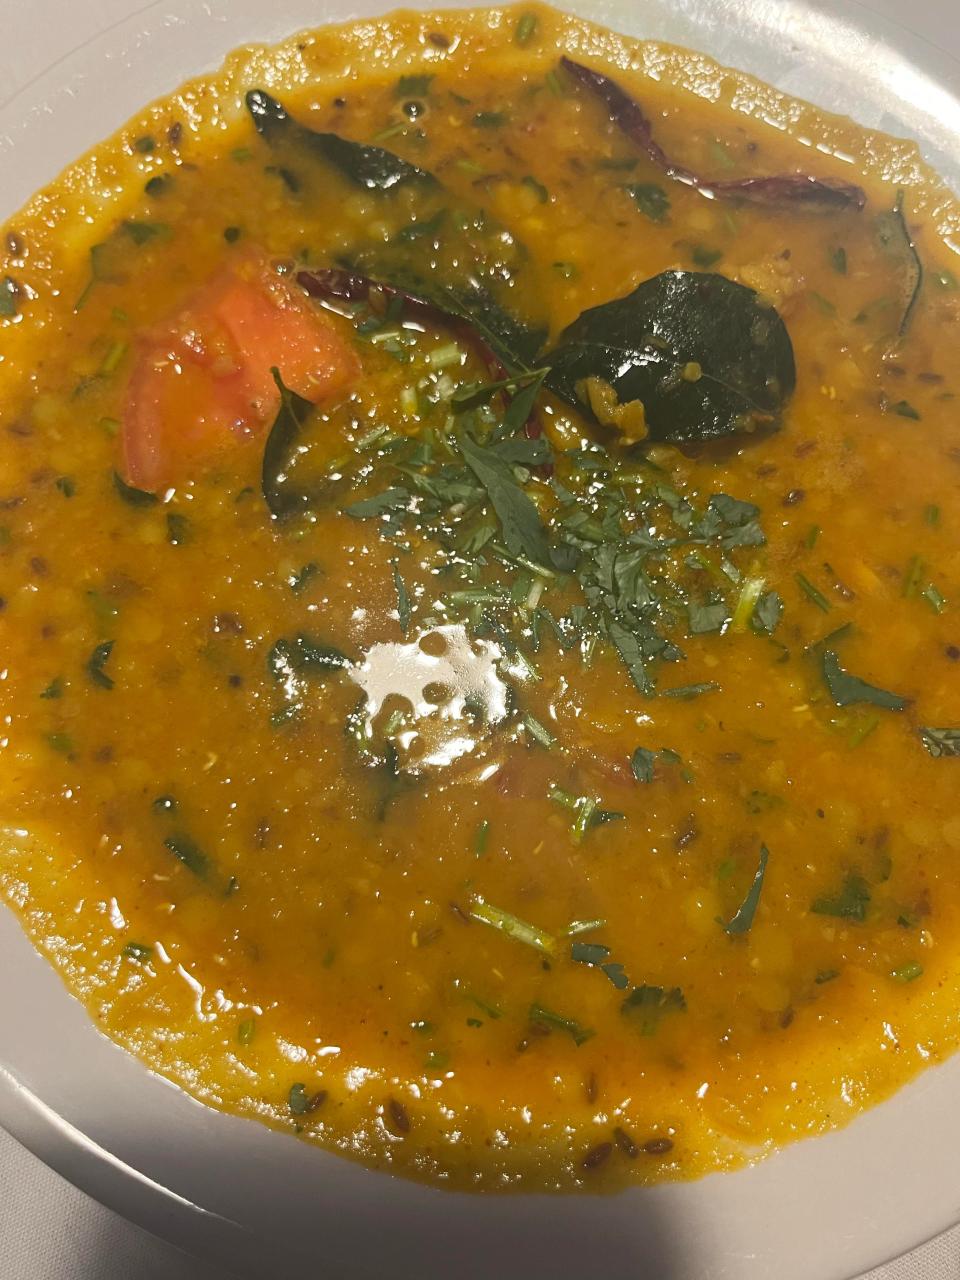 Tadka daal is made with yellow lentils cooked with onions, ginger, chili, herbs and spices at The Spice Delight in Munroe Falls.